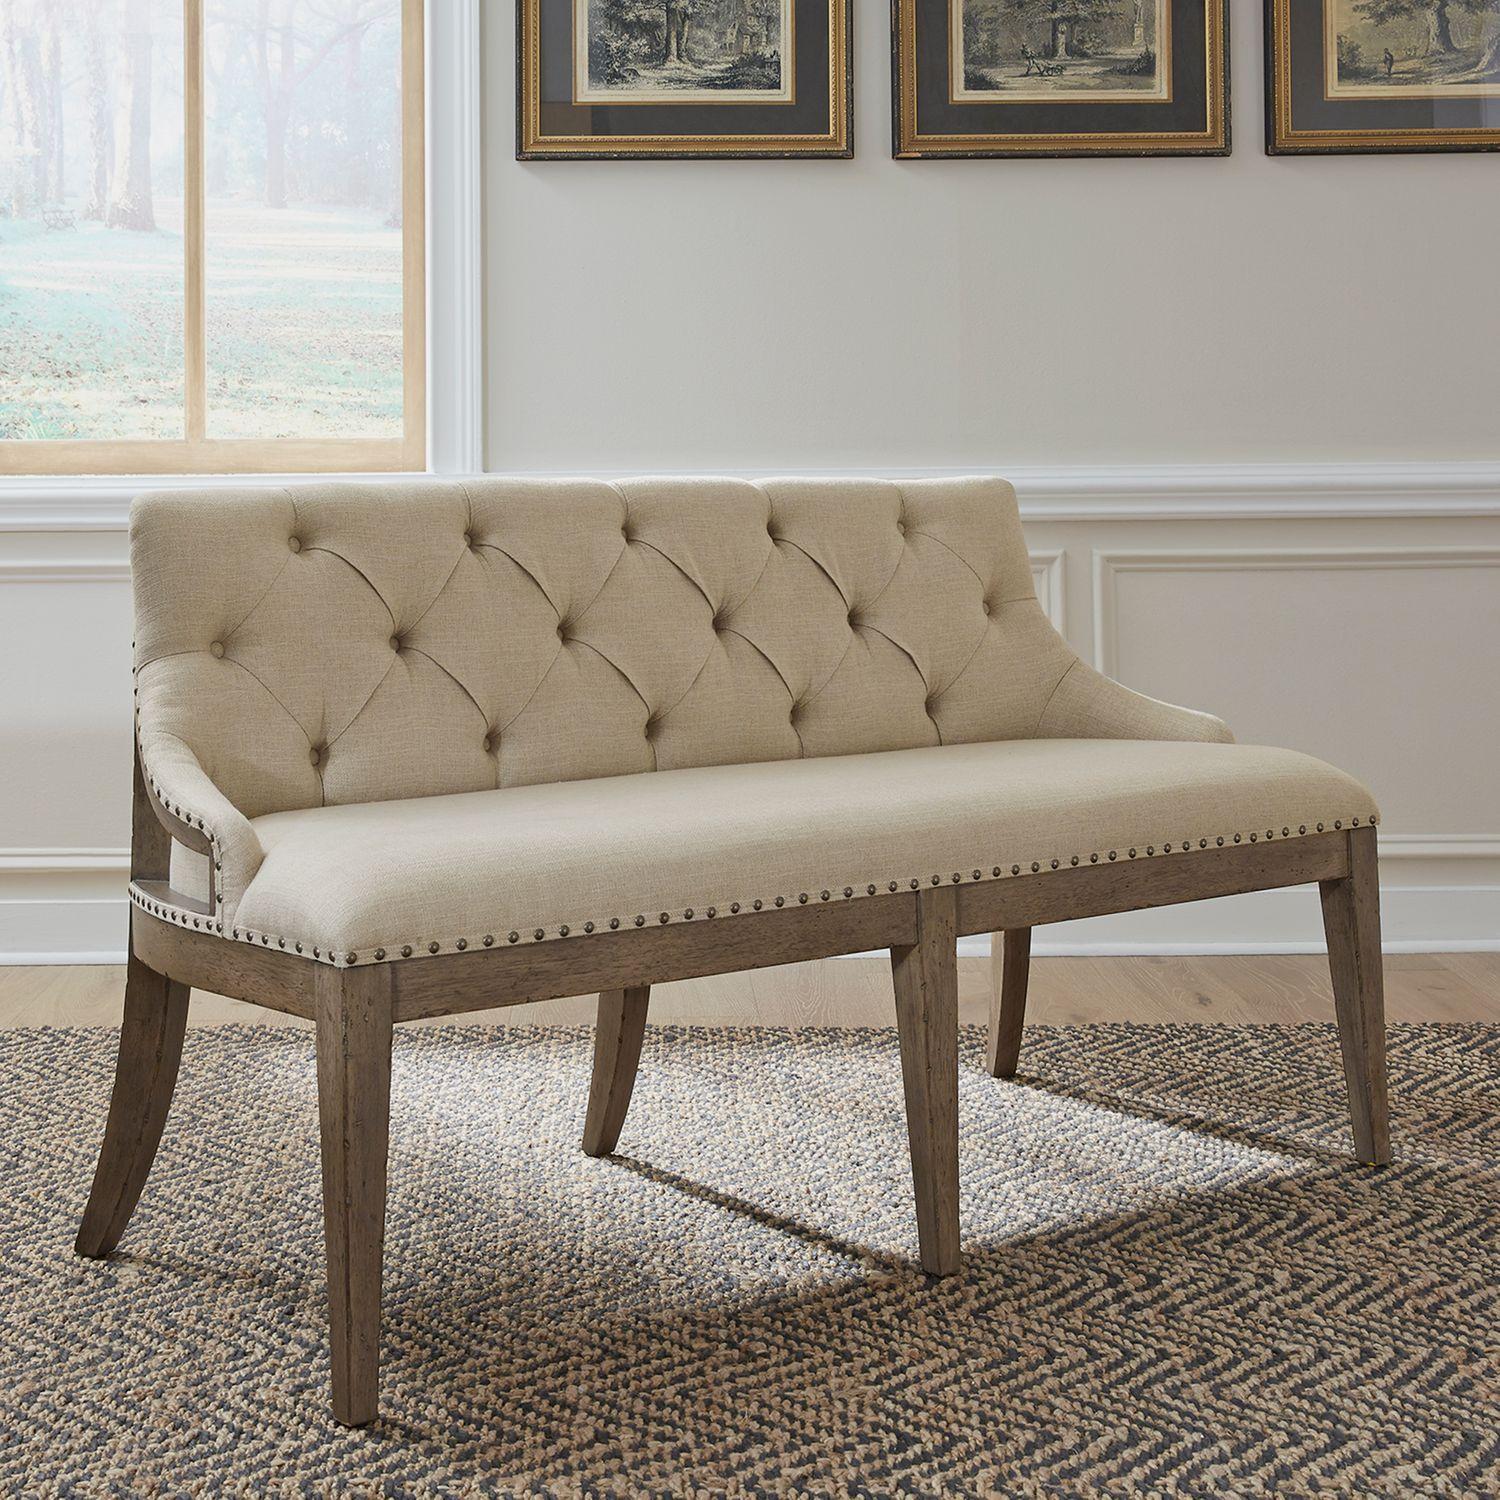 Transitional Dining Bench Americana Farmhouse (615-DR) 615-C6501B in Taupe, Black Linen